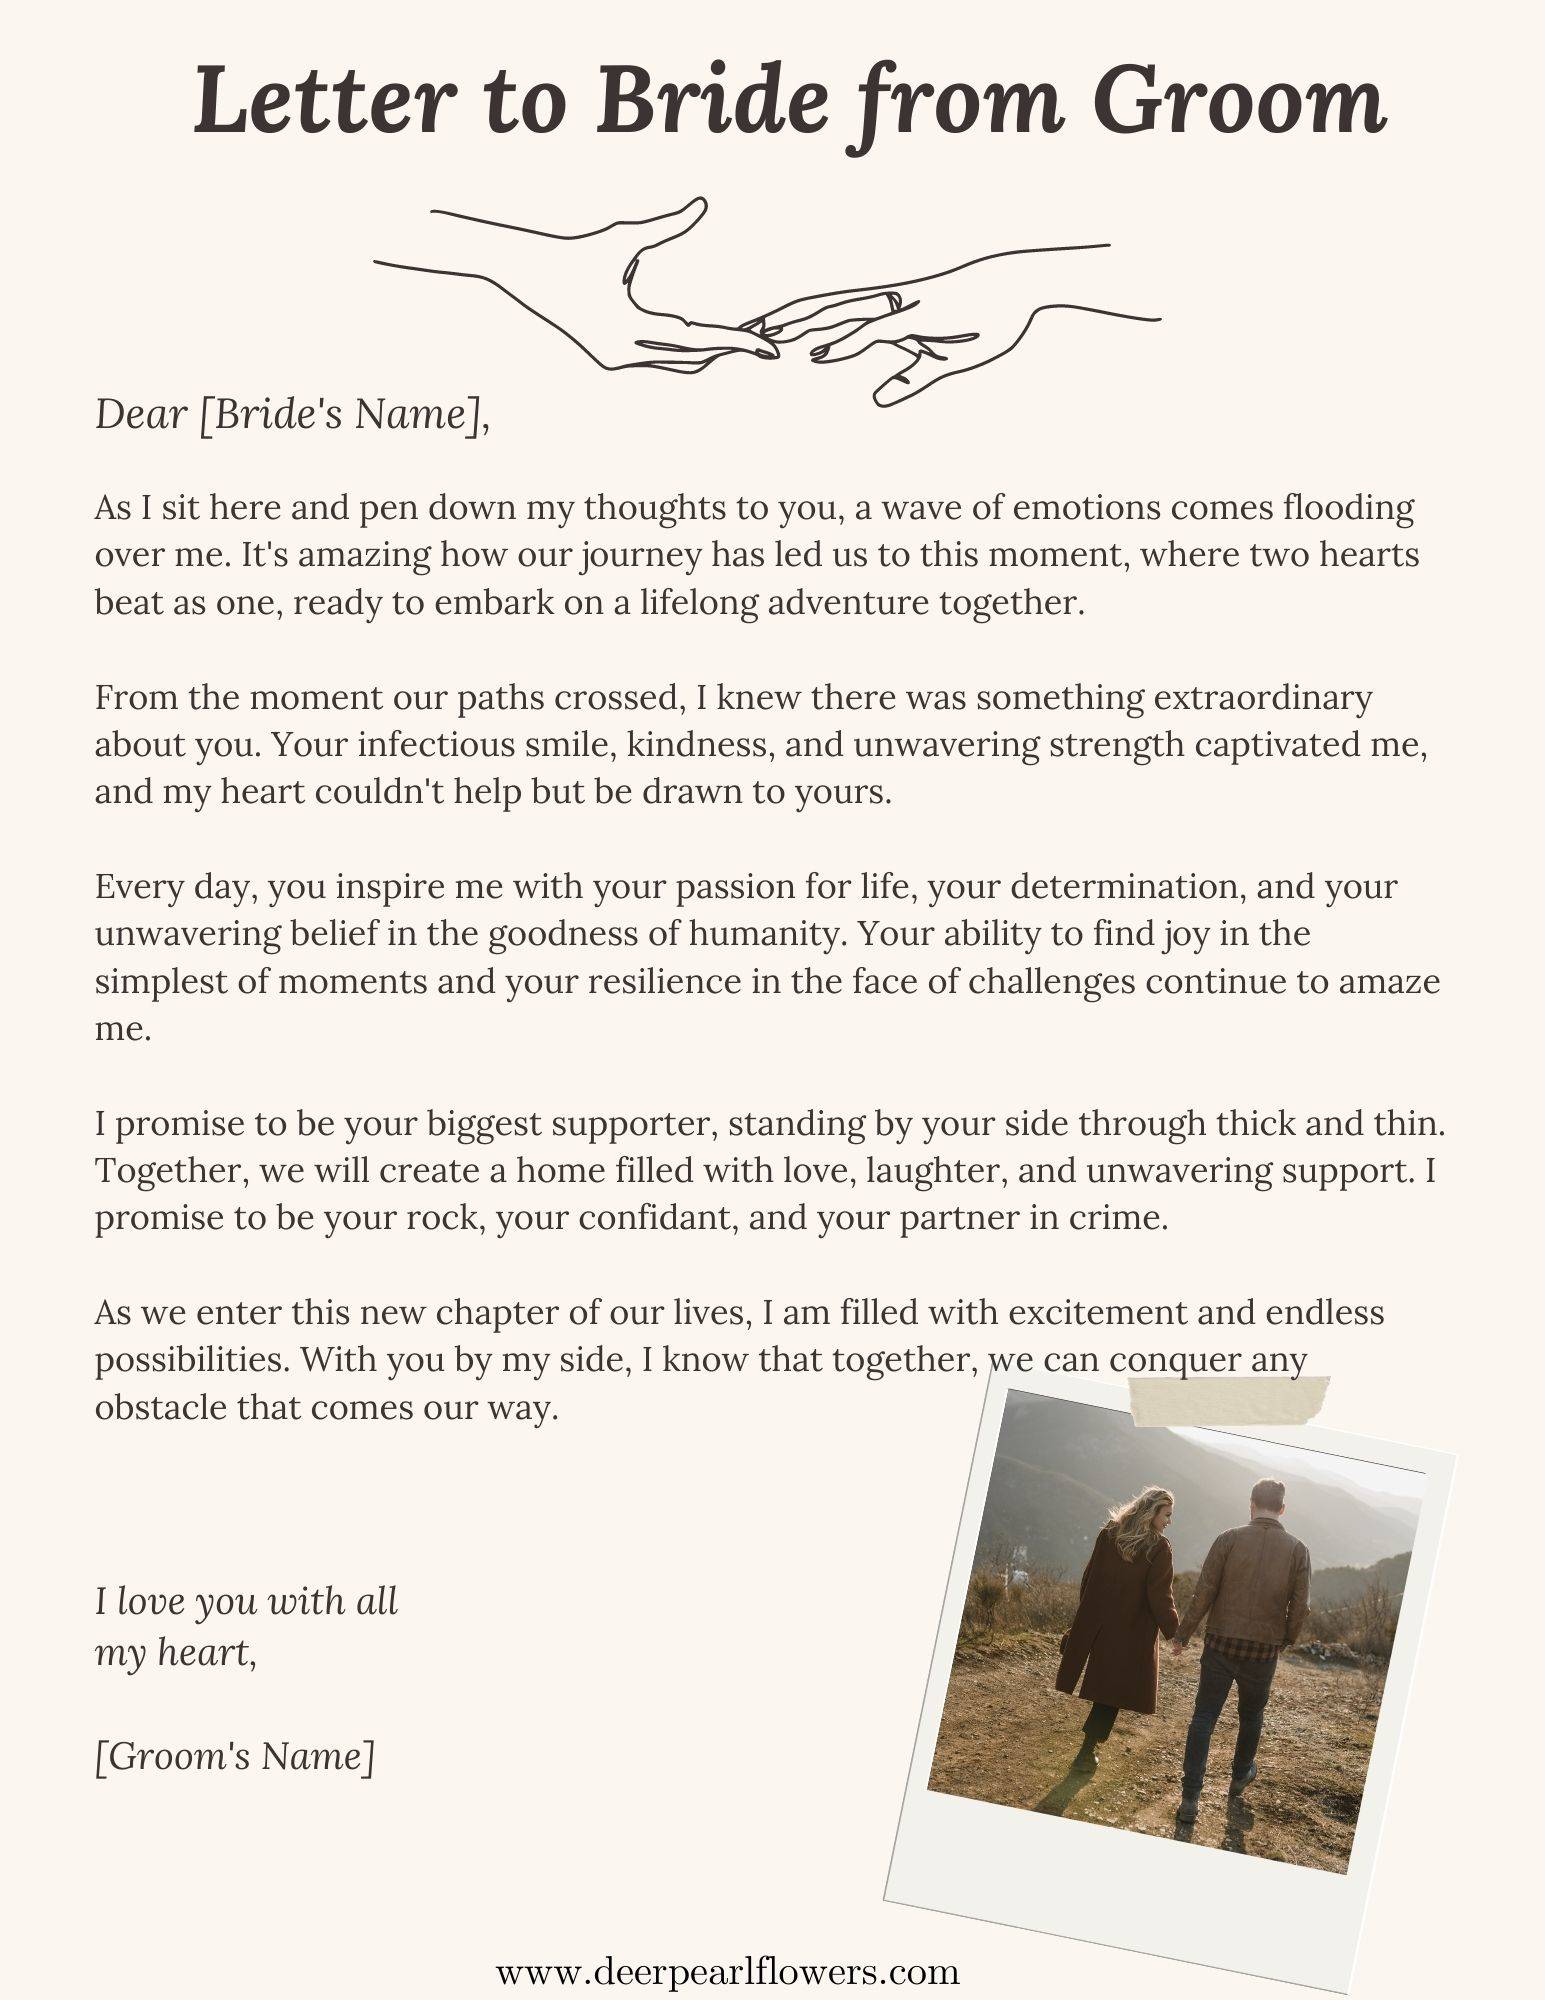 Letter to Bride from Groom Example